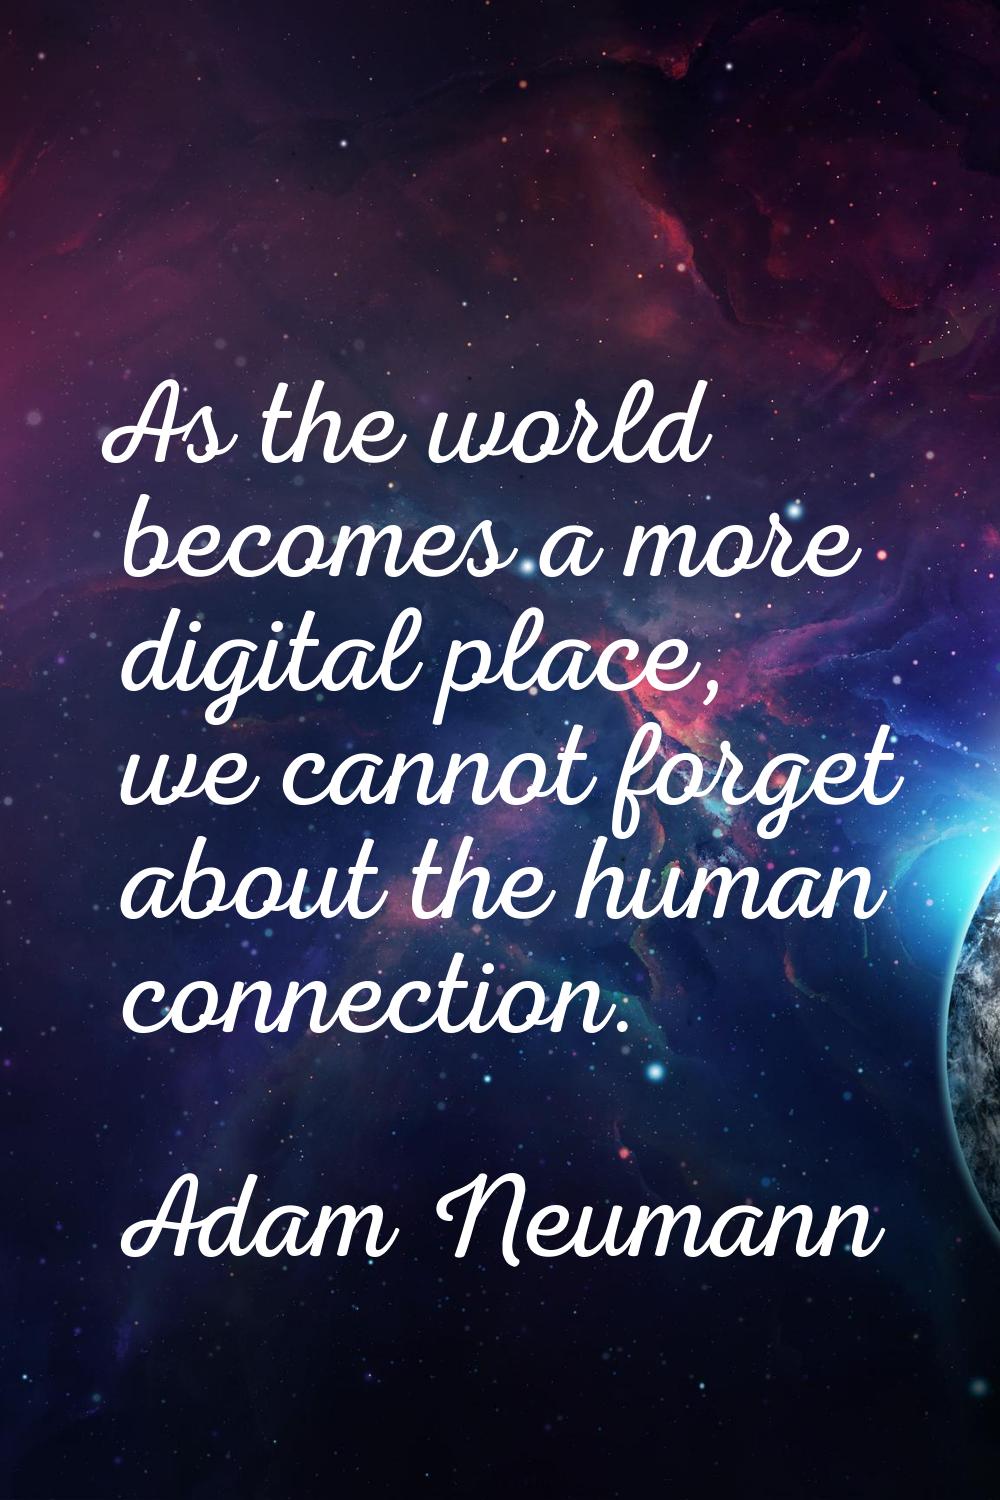 As the world becomes a more digital place, we cannot forget about the human connection.